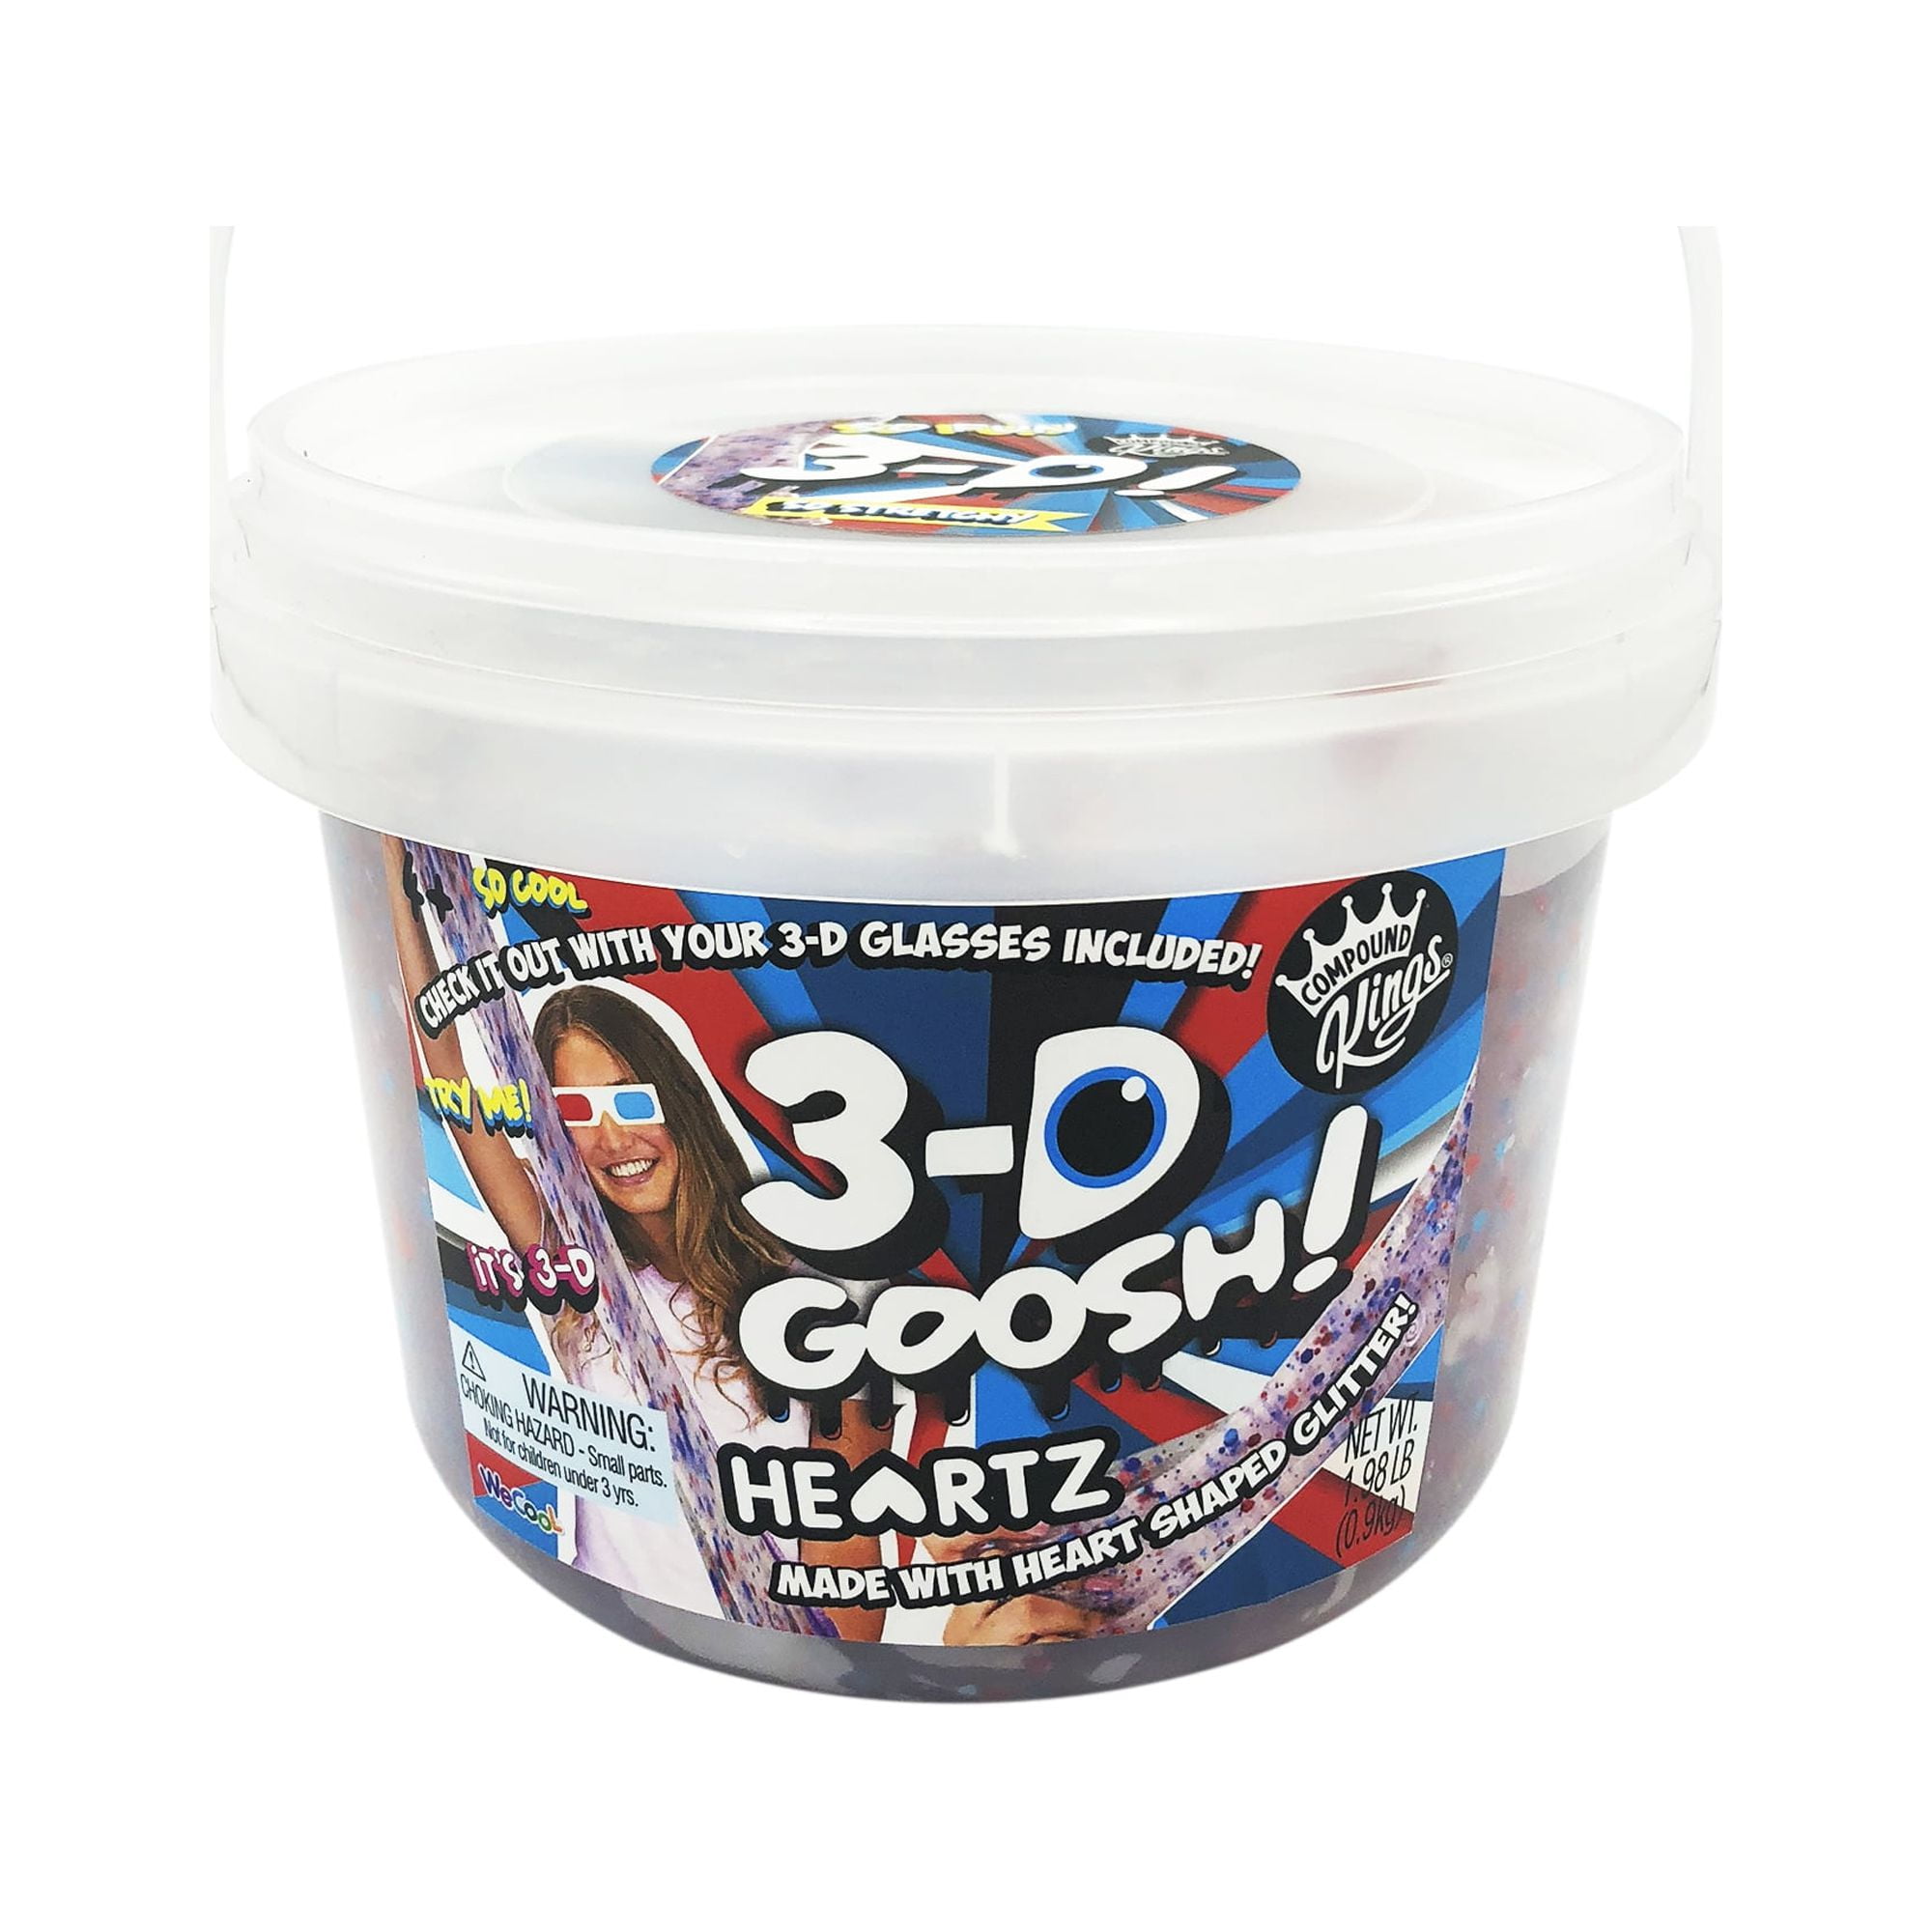 Compound Kings 3D Goosh Heartz 3lb Slime Bucket with Glasses 